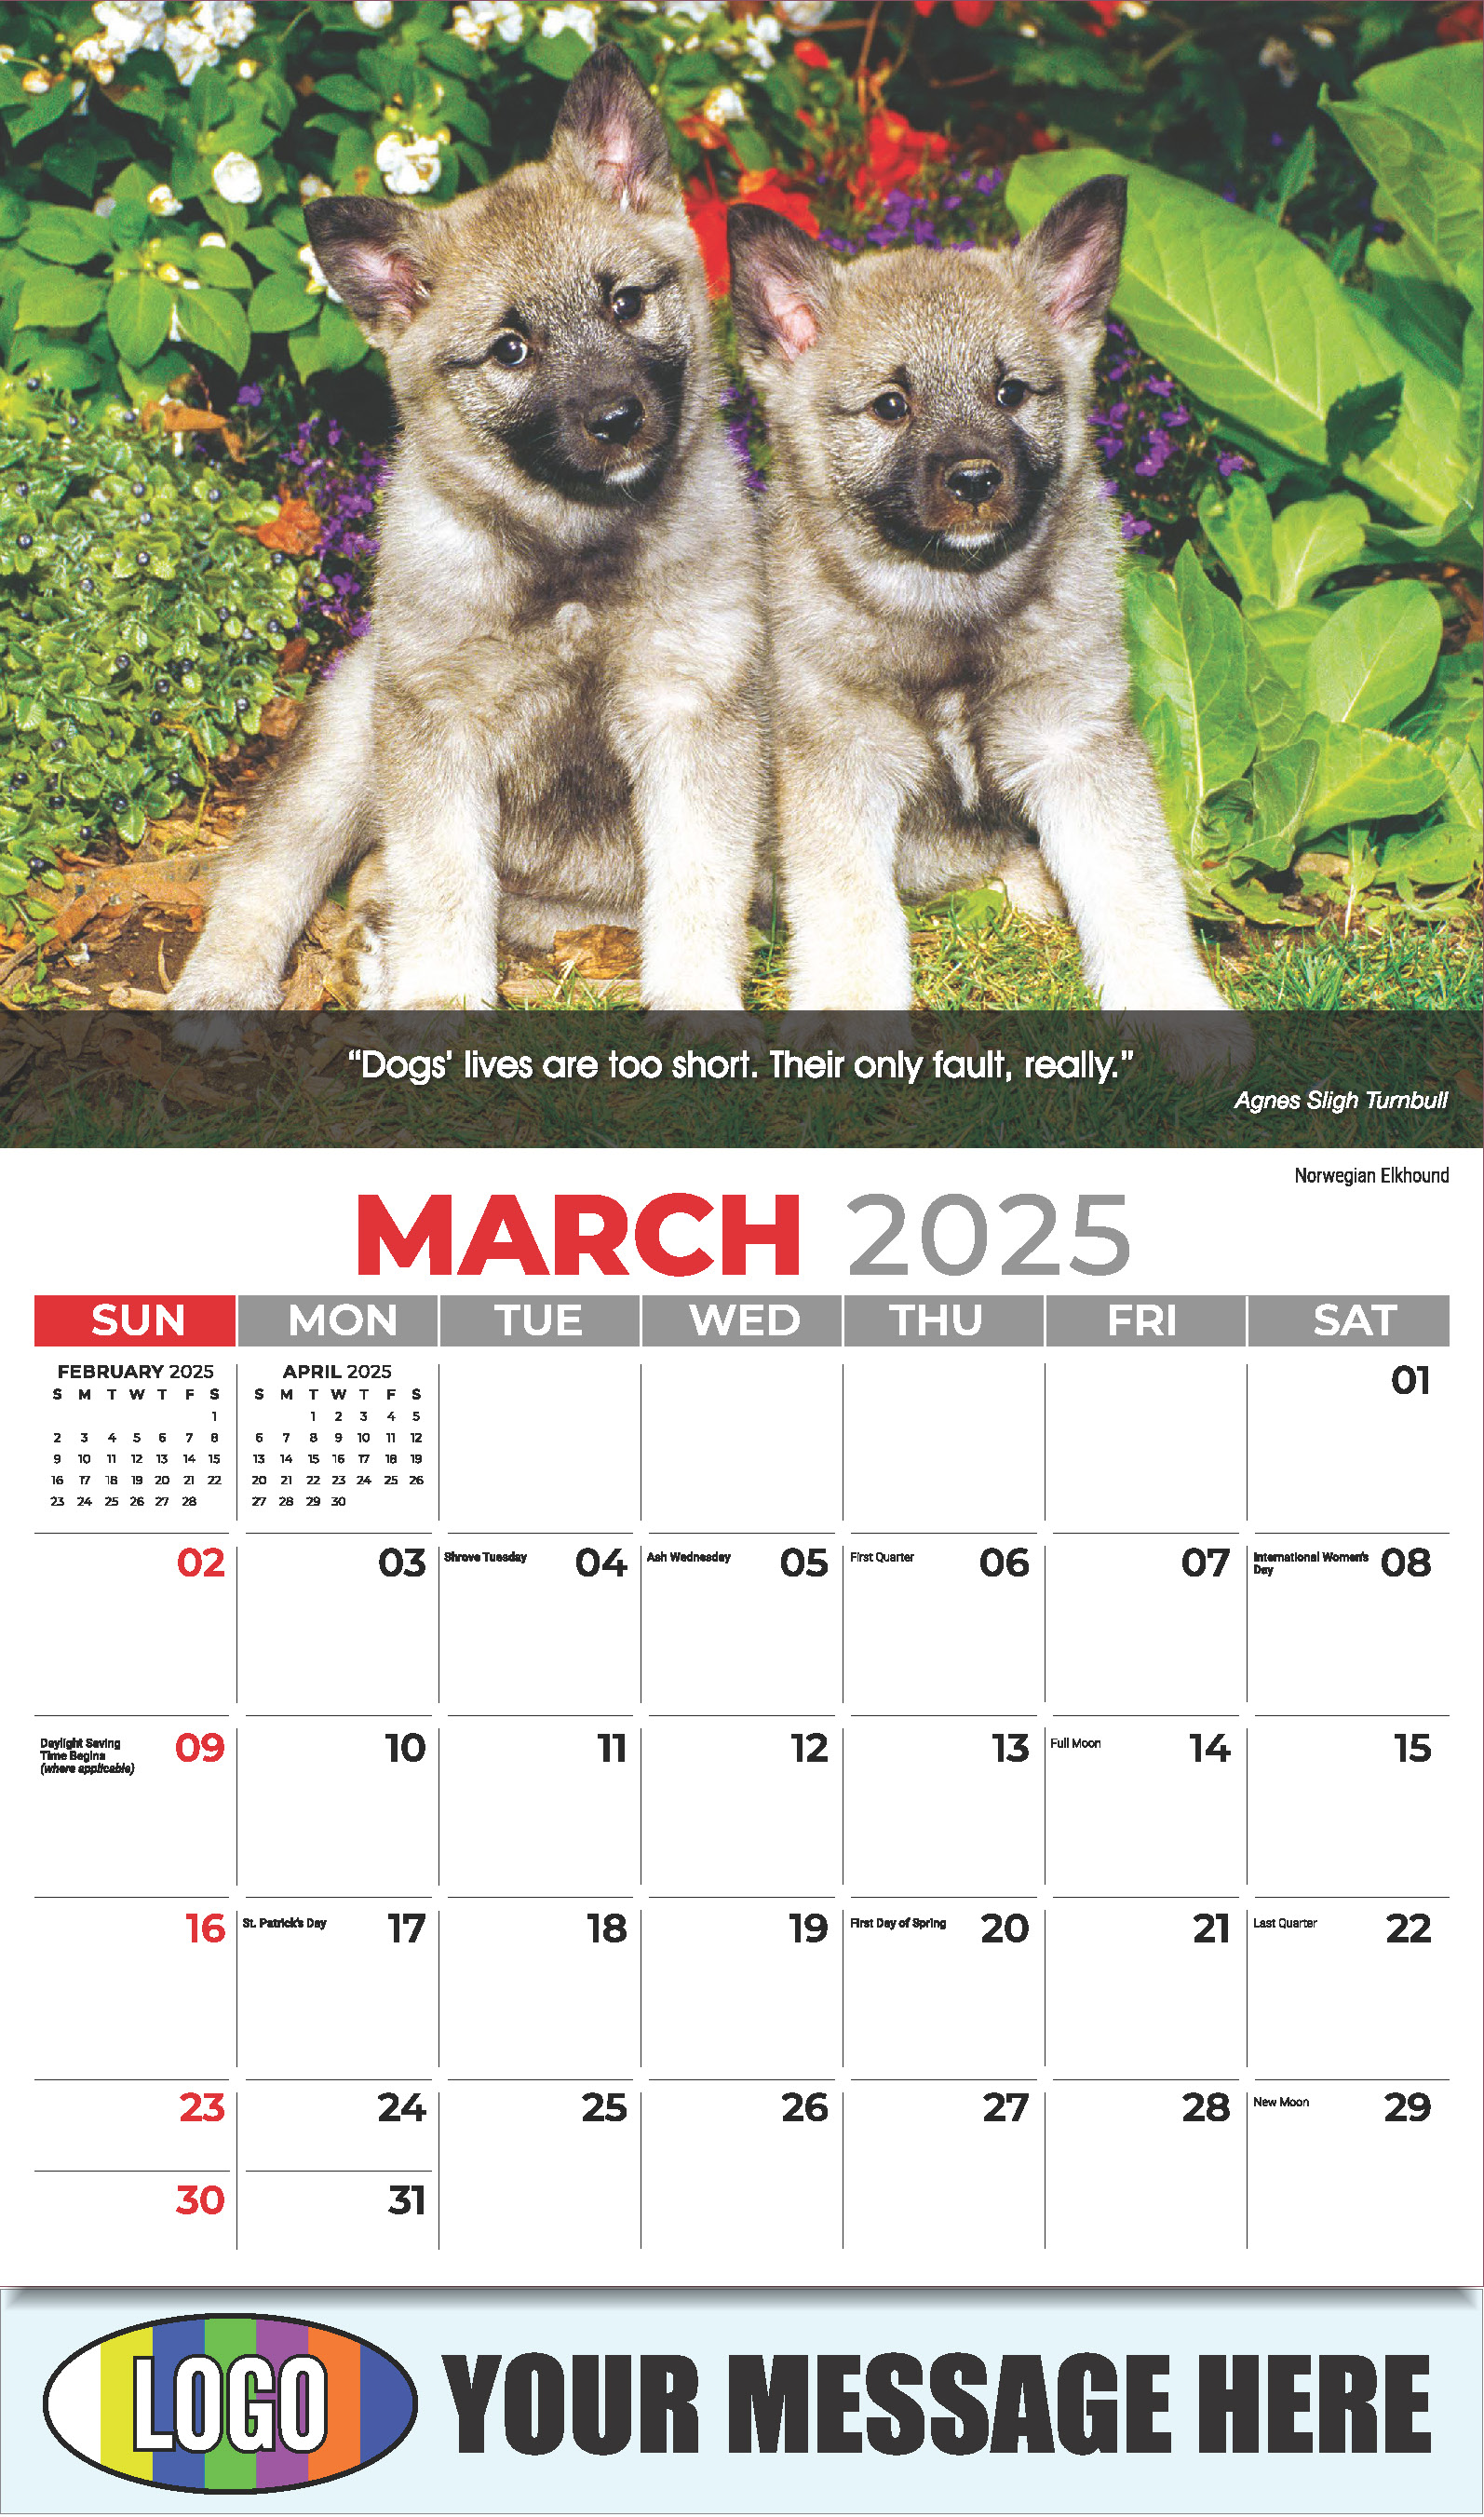 Dogs 2025 Vets and Pets Business Promotion Calendar - March